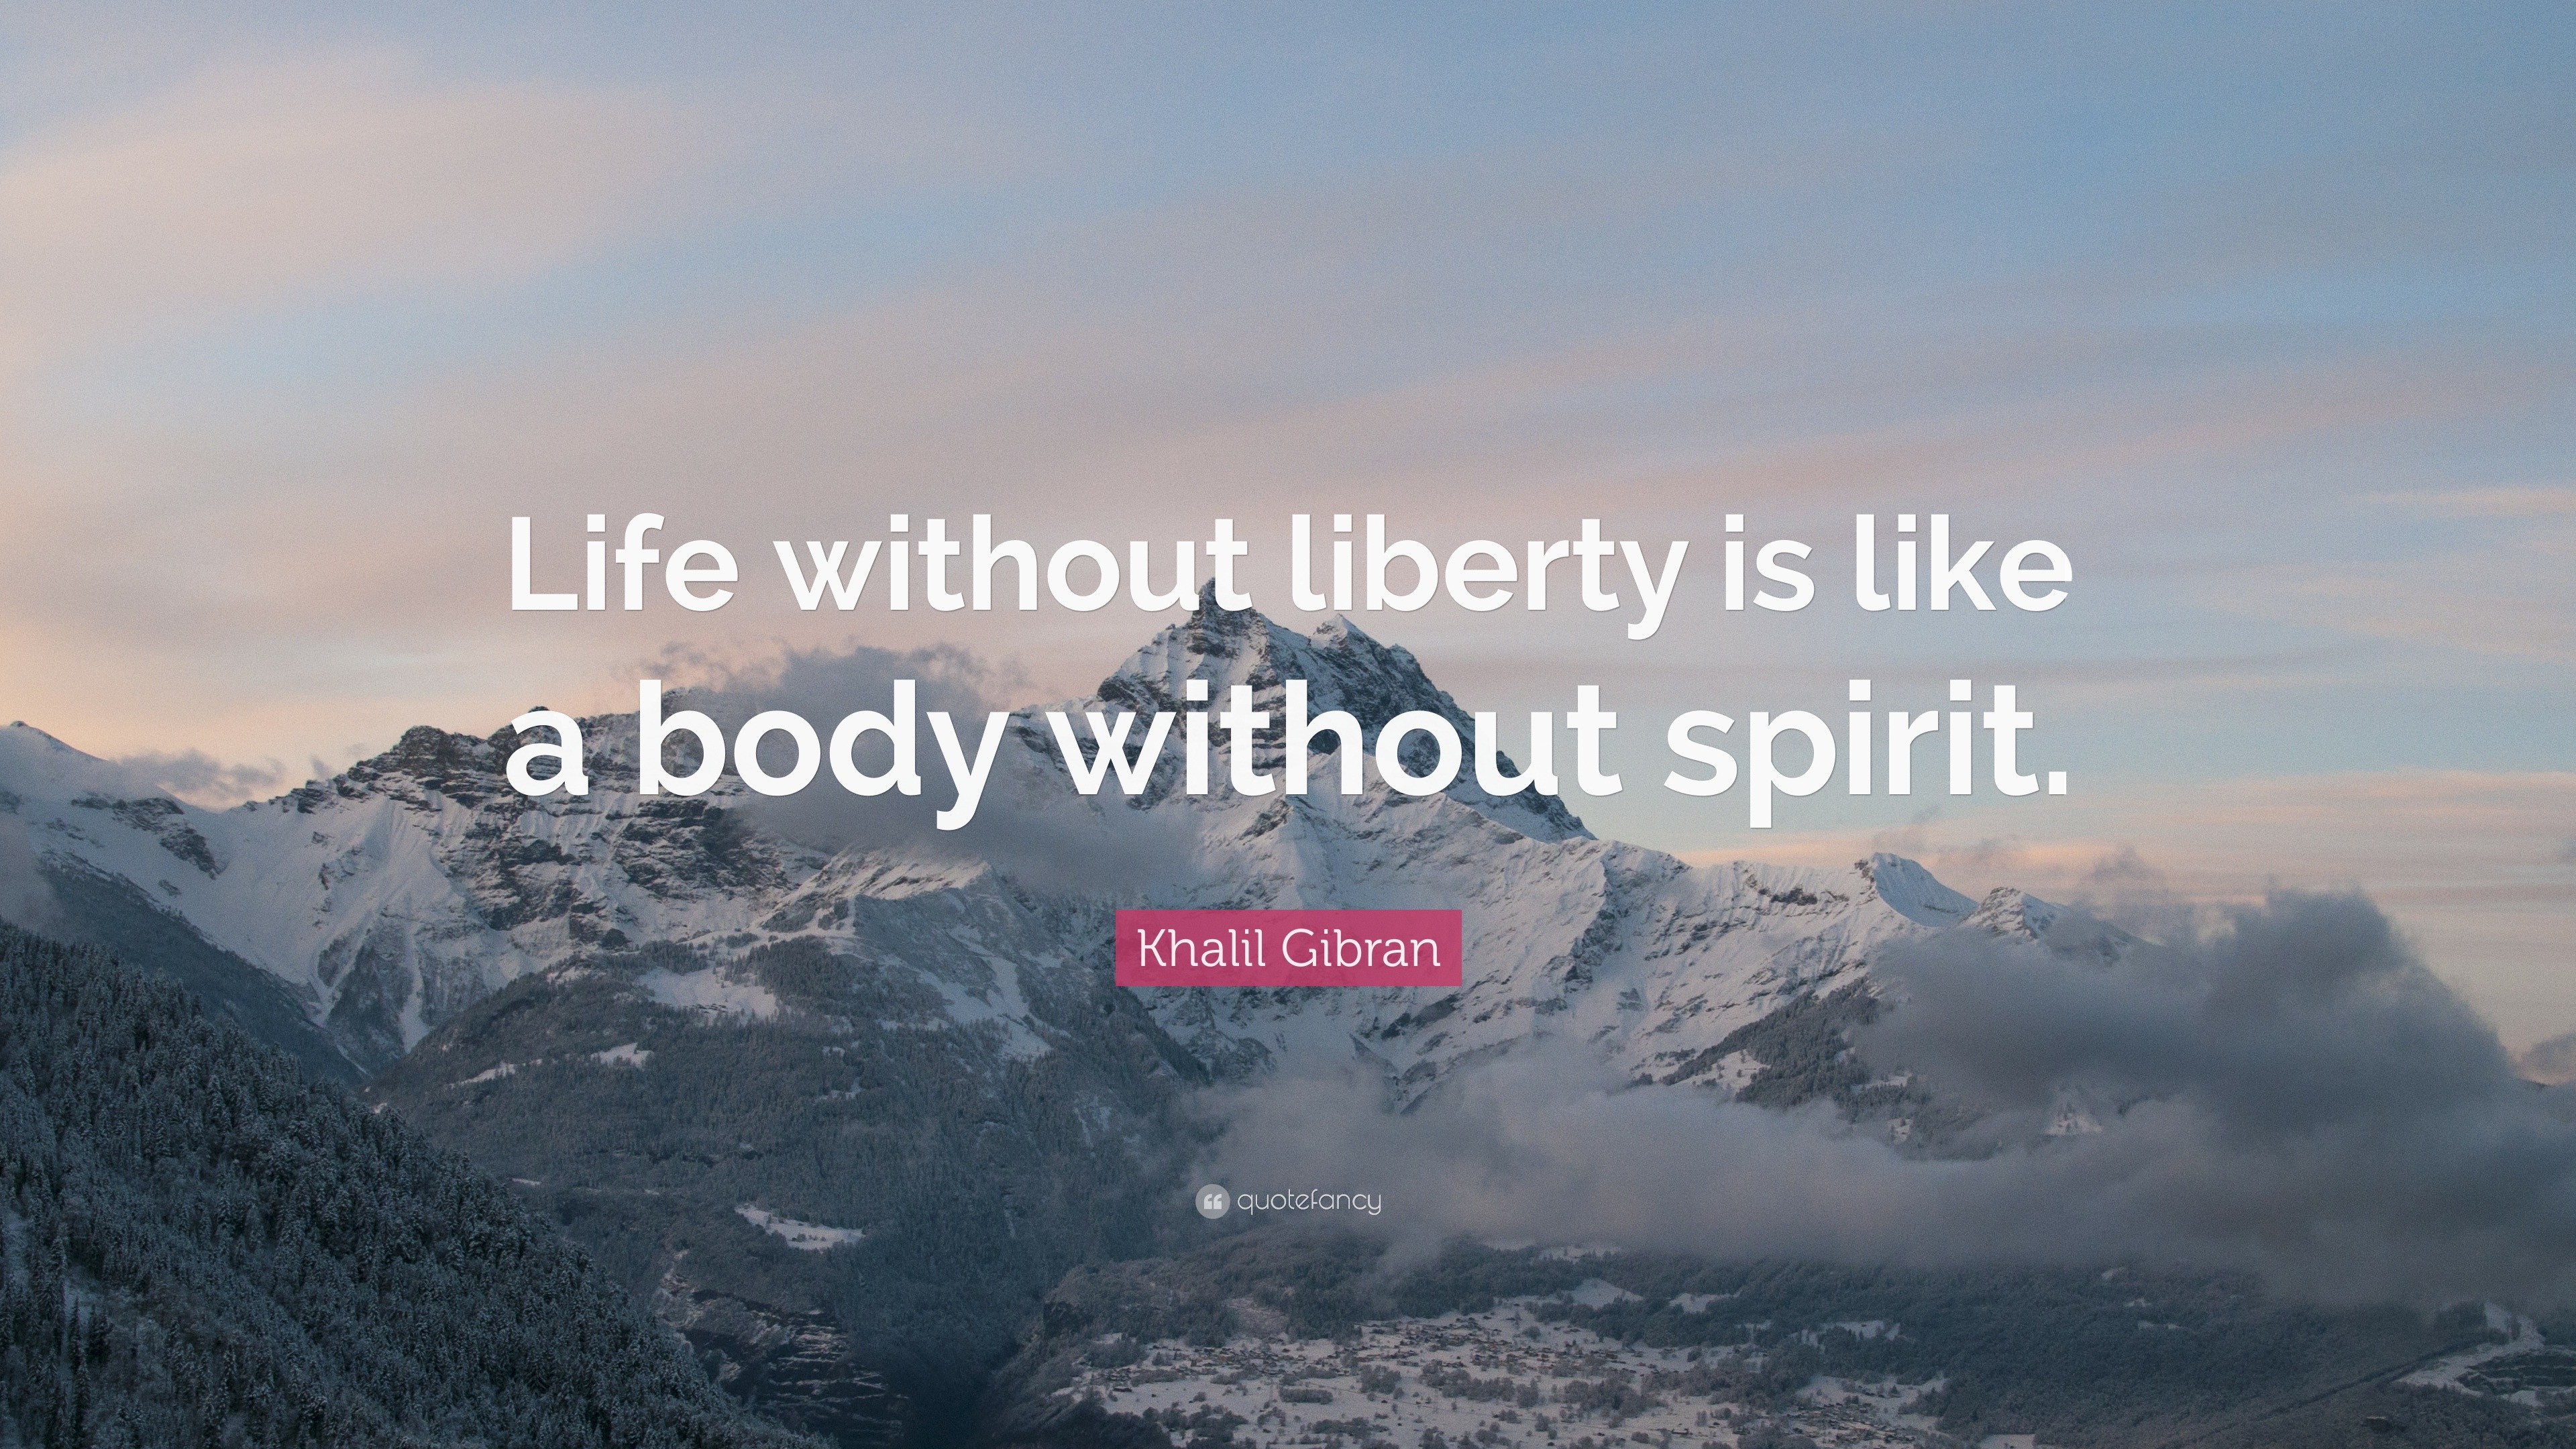 Freedom Quotes “Life without liberty is like a body without spirit ” —